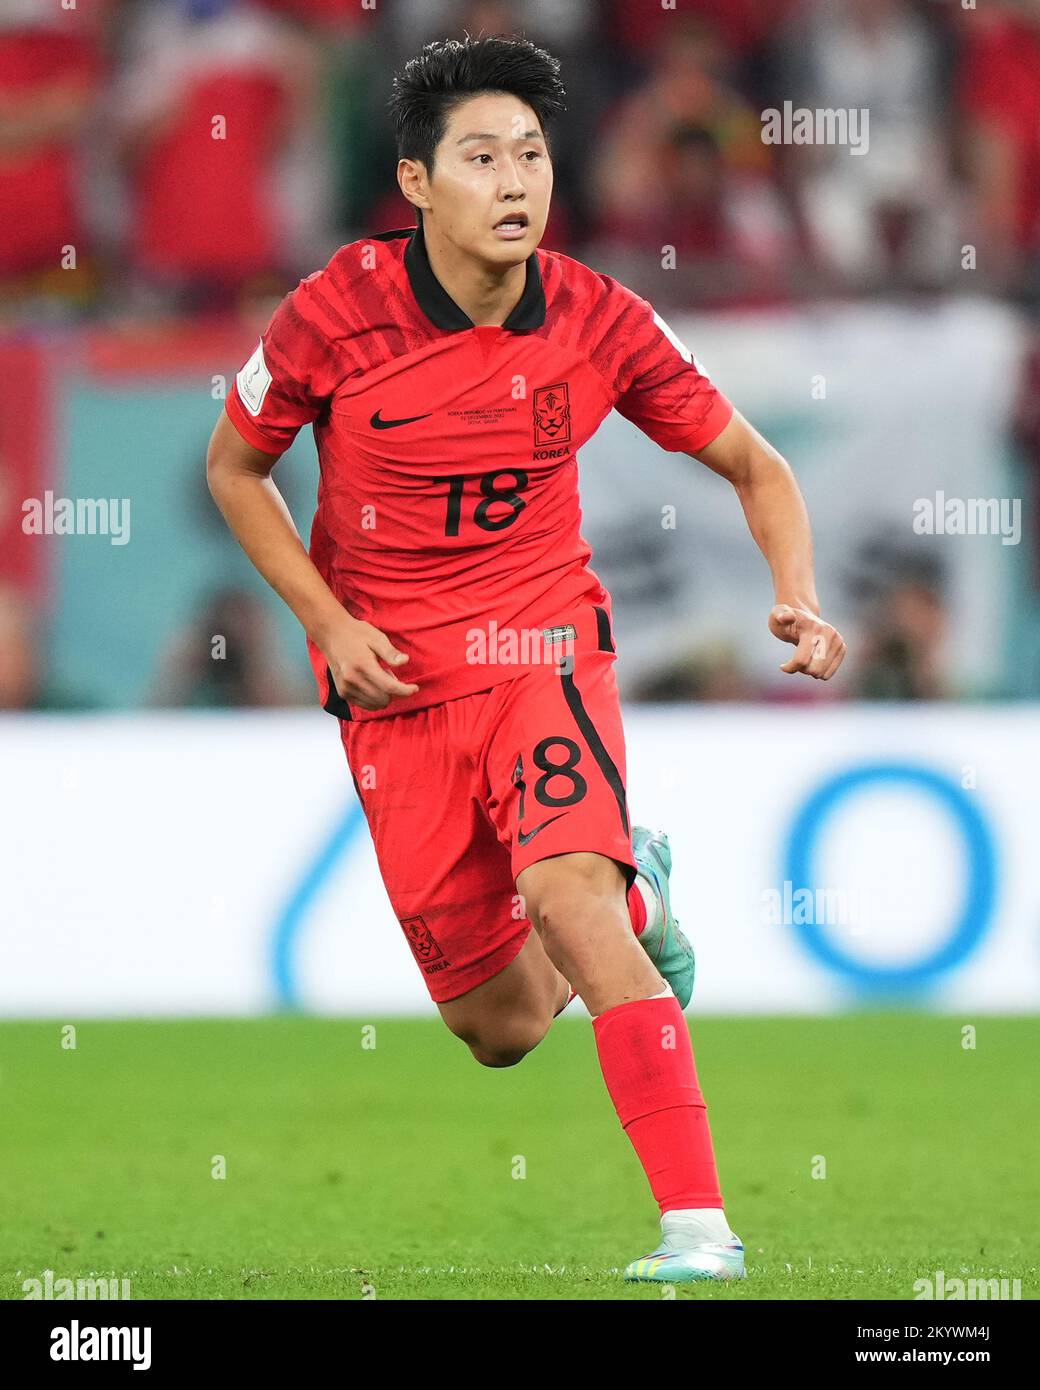 Lee Kangin Lee of South Korea during the FIFA World Cup Qatar 2022 match,  Group H, between South Korea v Portugal played at Education City Stadium on  Dec 2, 2022 in Doha,